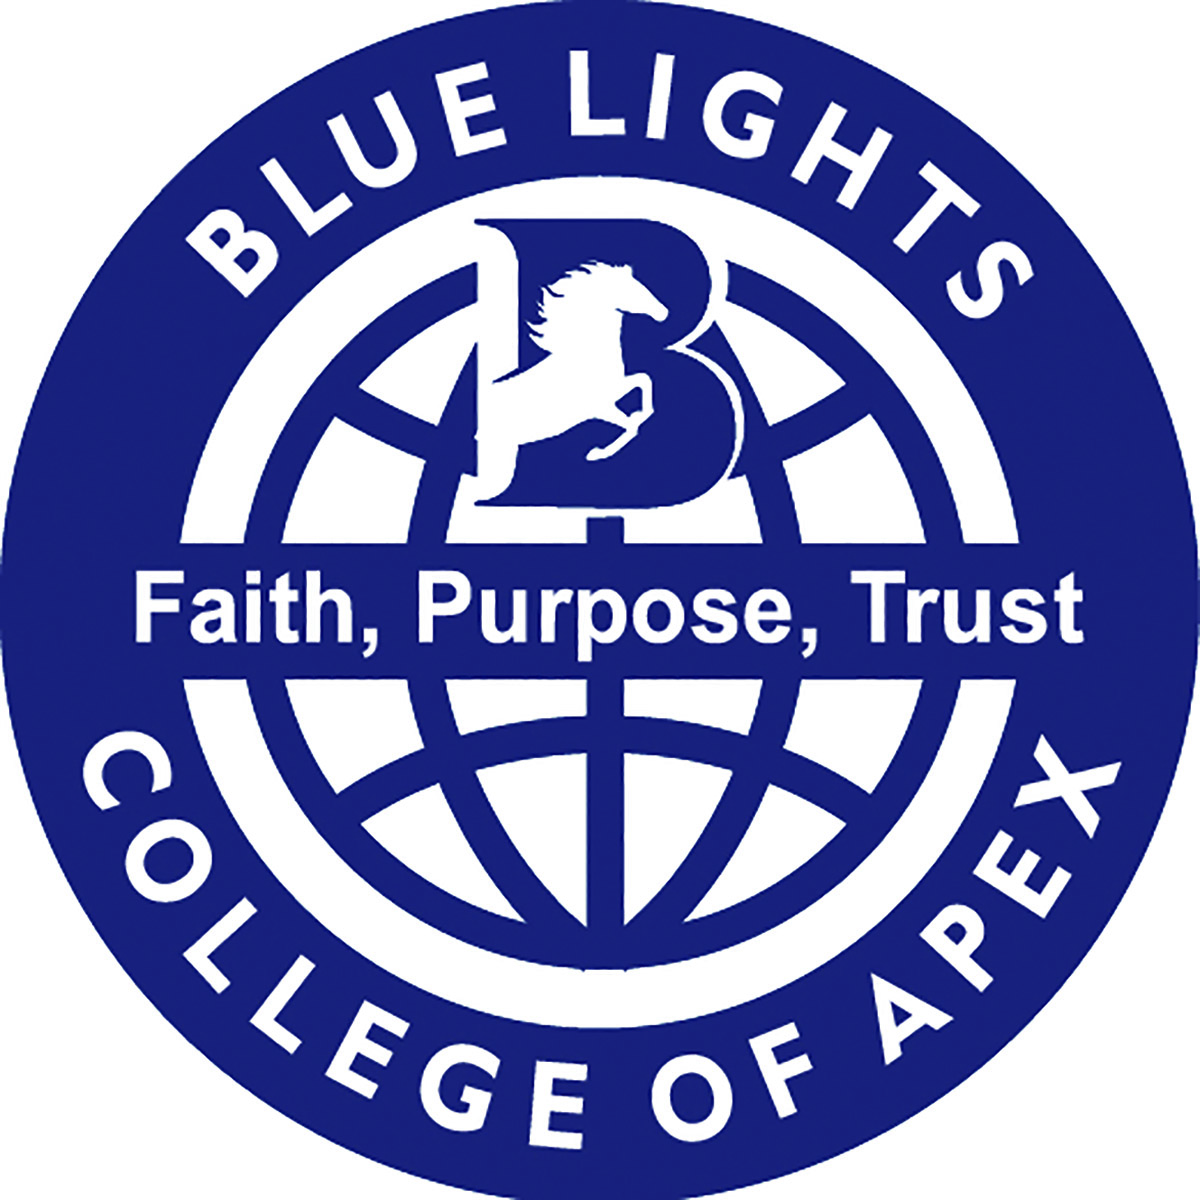 Blue Lights College        by Amy Iori